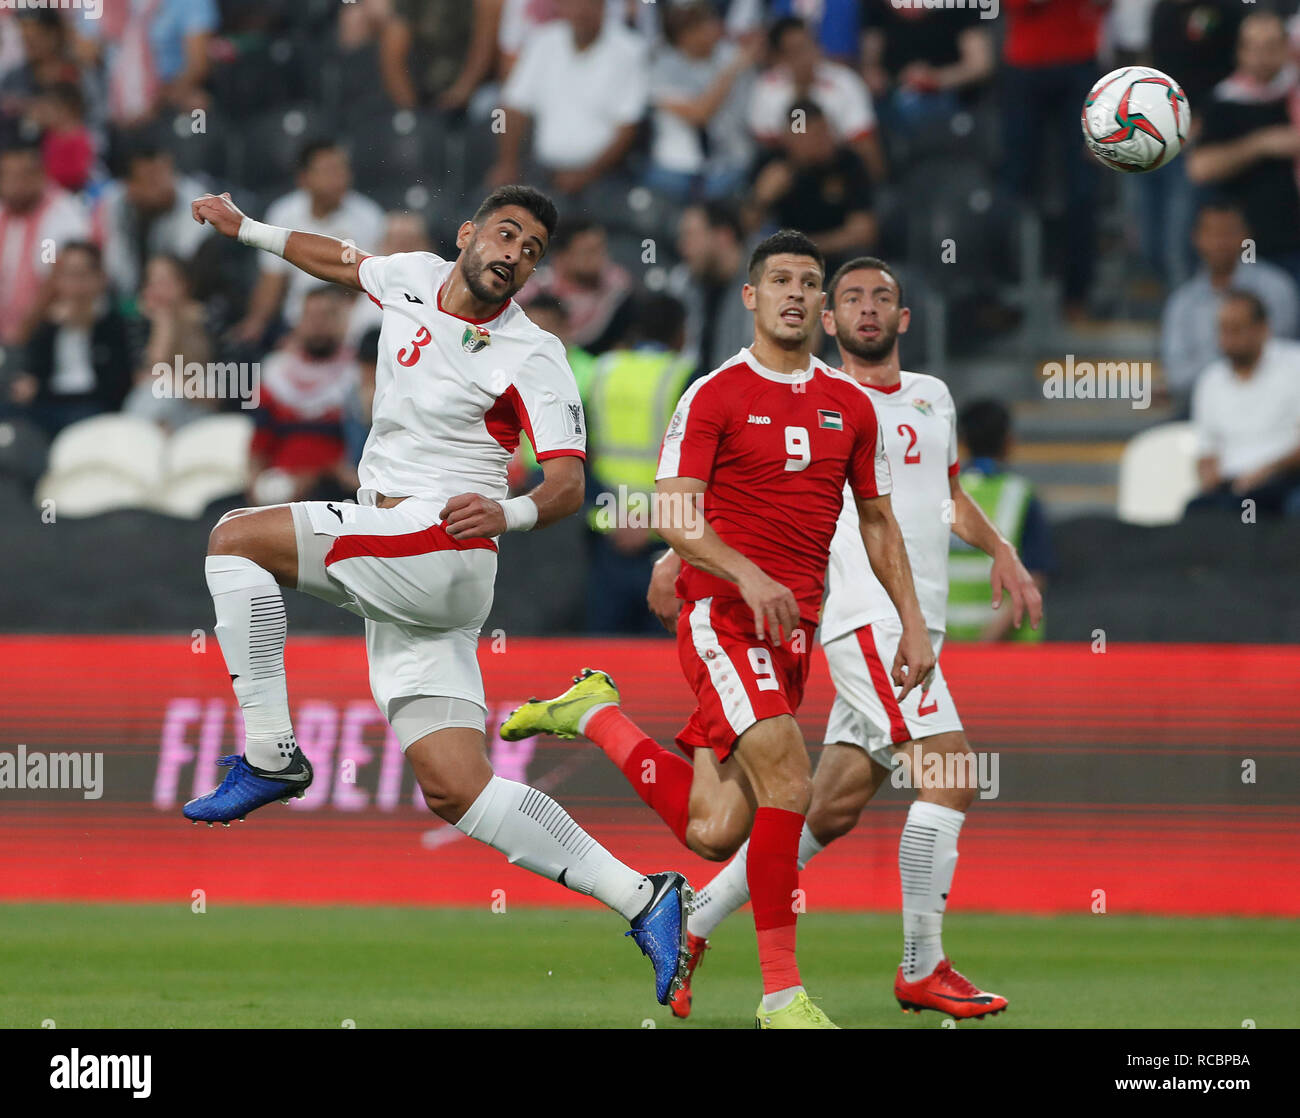 Abu Dhabi, United Arab Emirates. 15th Jan, 2019. Jordan's Tareq Khattab (L)  heads for the ball during the 2019 AFC Asian Cup group B match between  Palestine and Jordan at the Mohammed